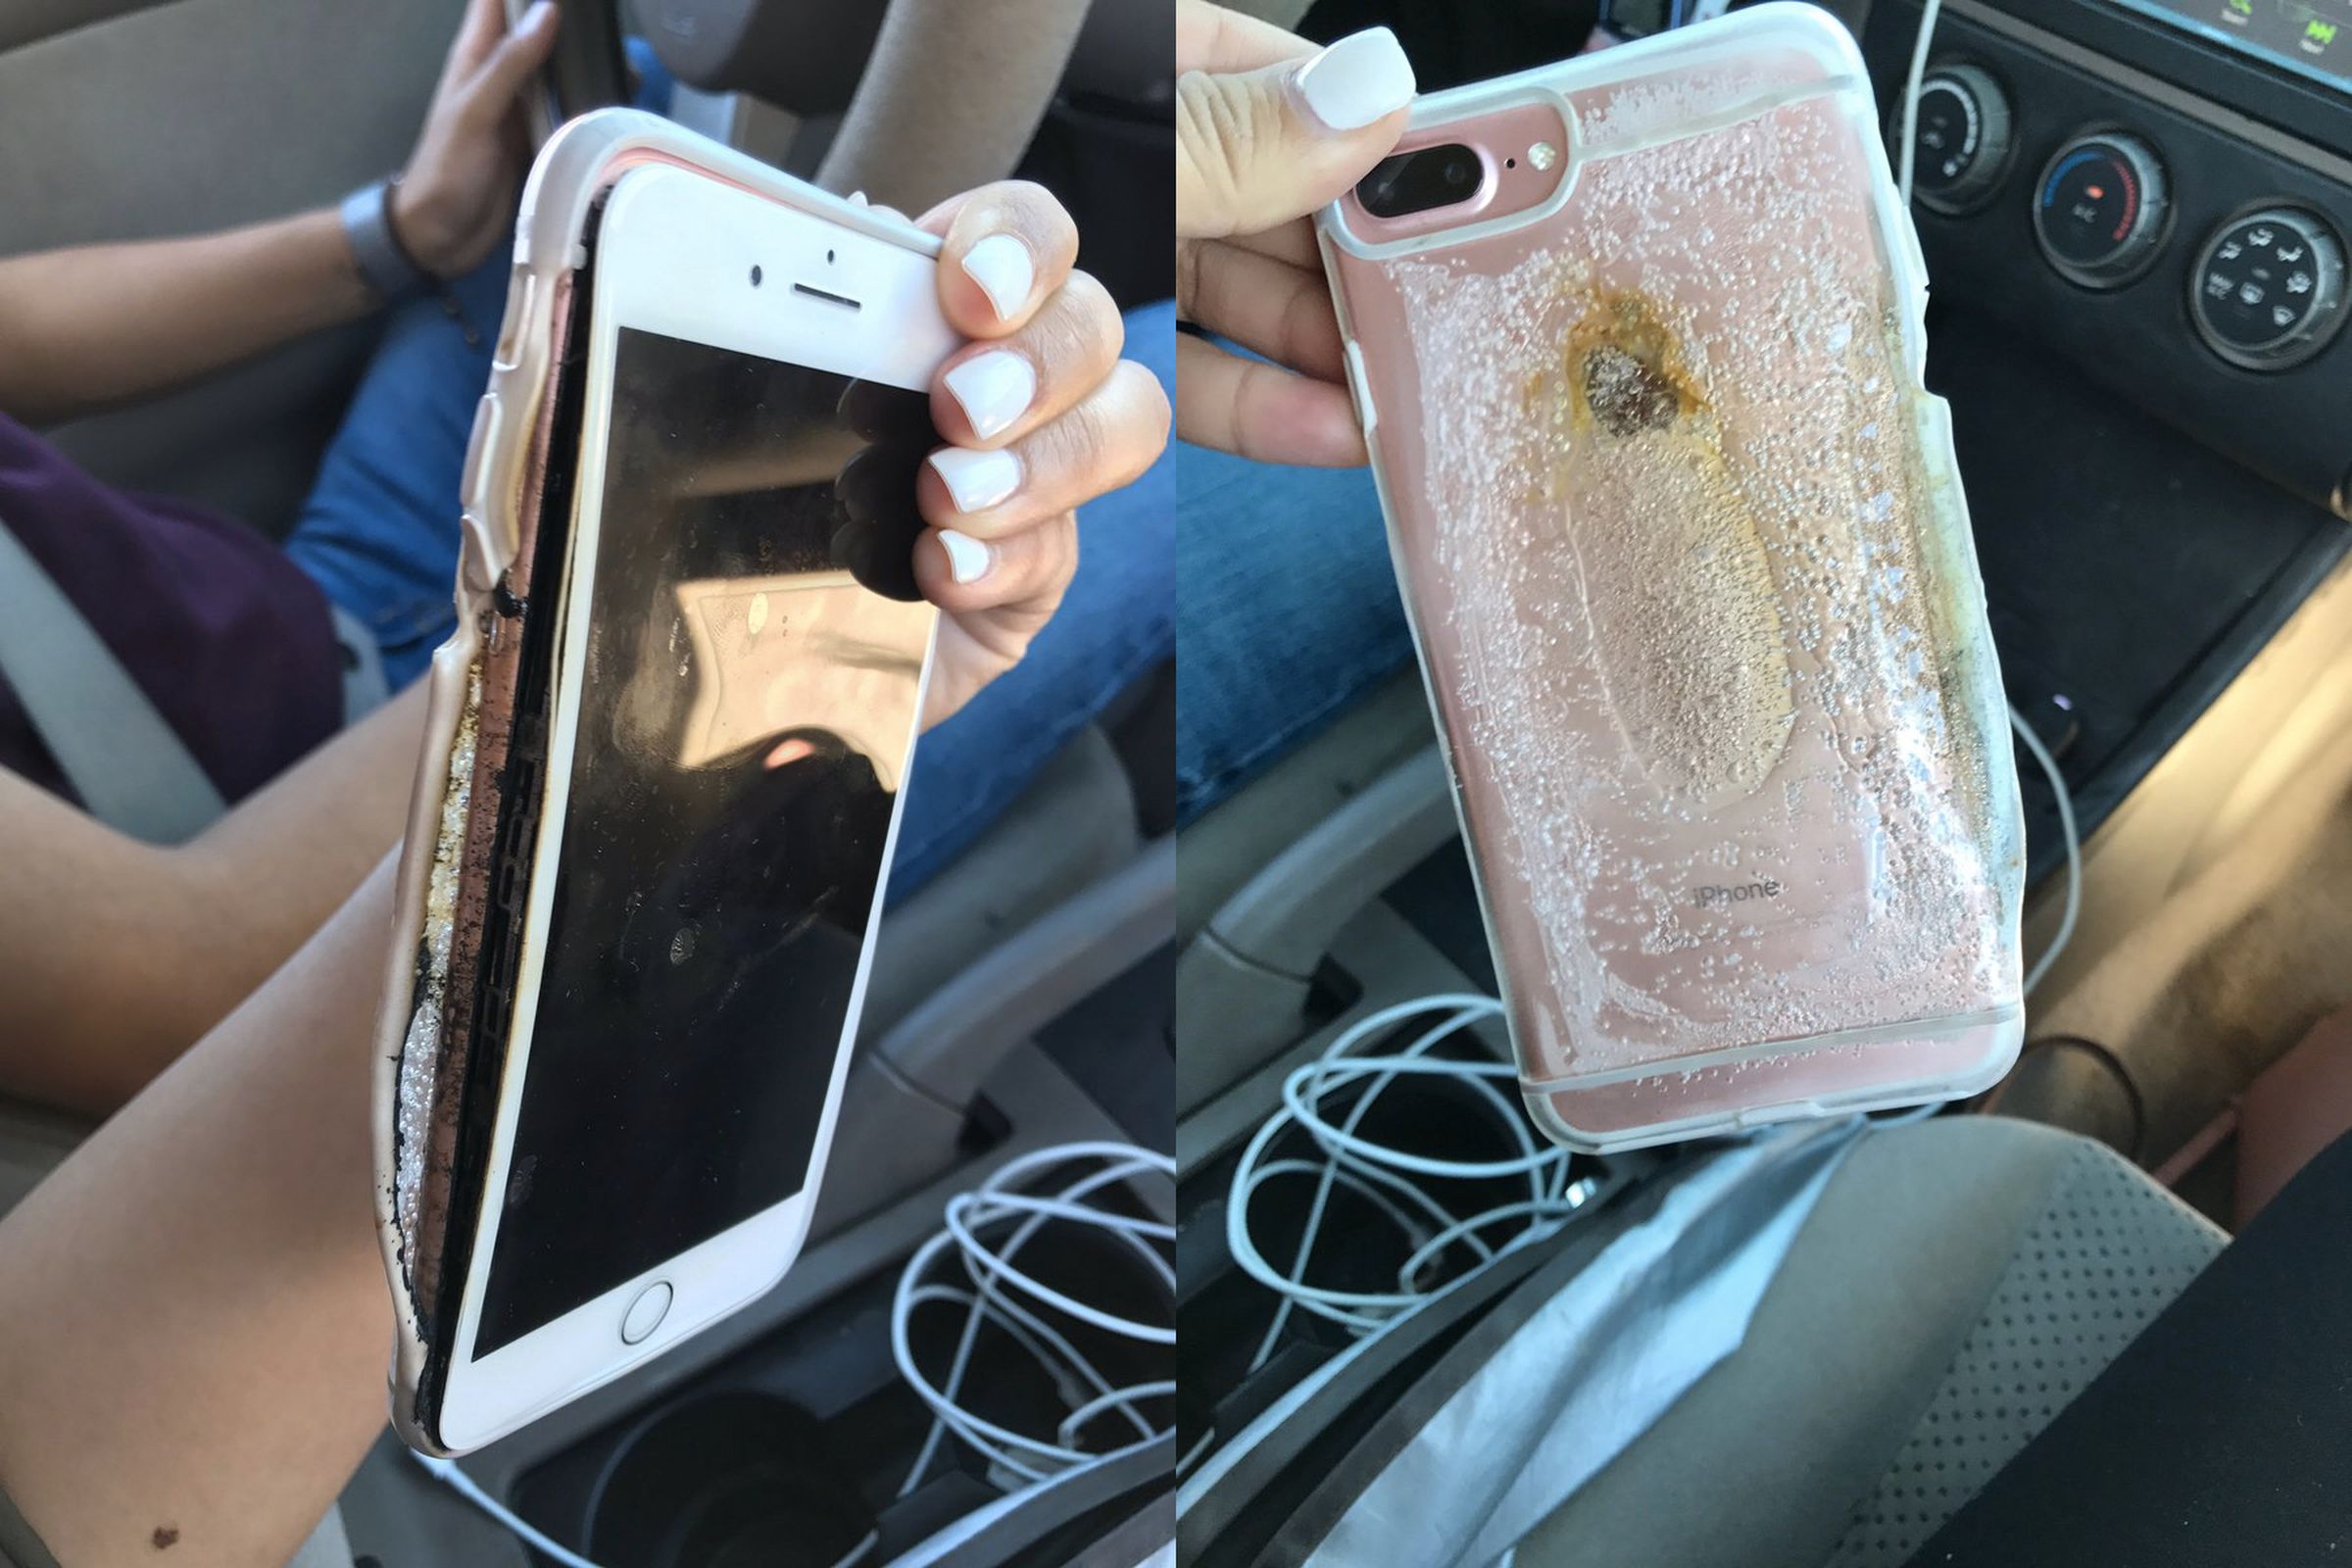 Photos showing the damage to the iPhone 7 Plus and its case. 